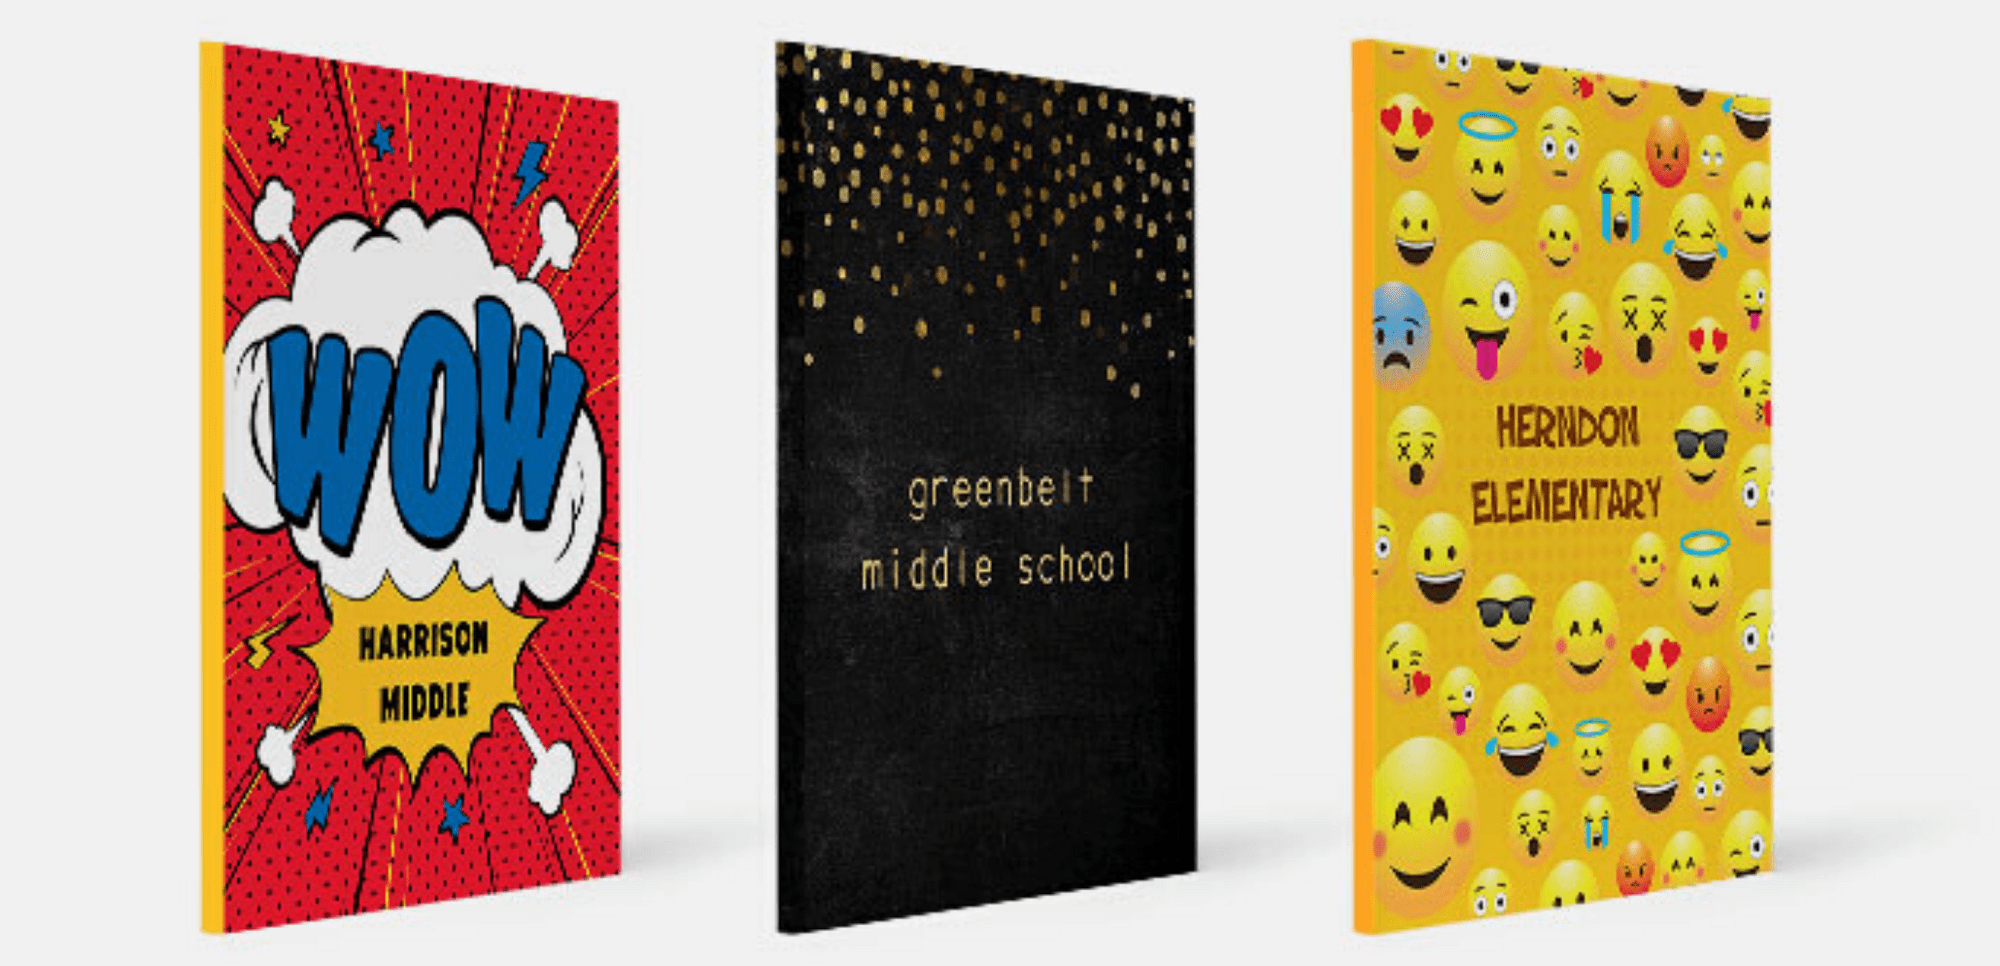 Three yearbook covers